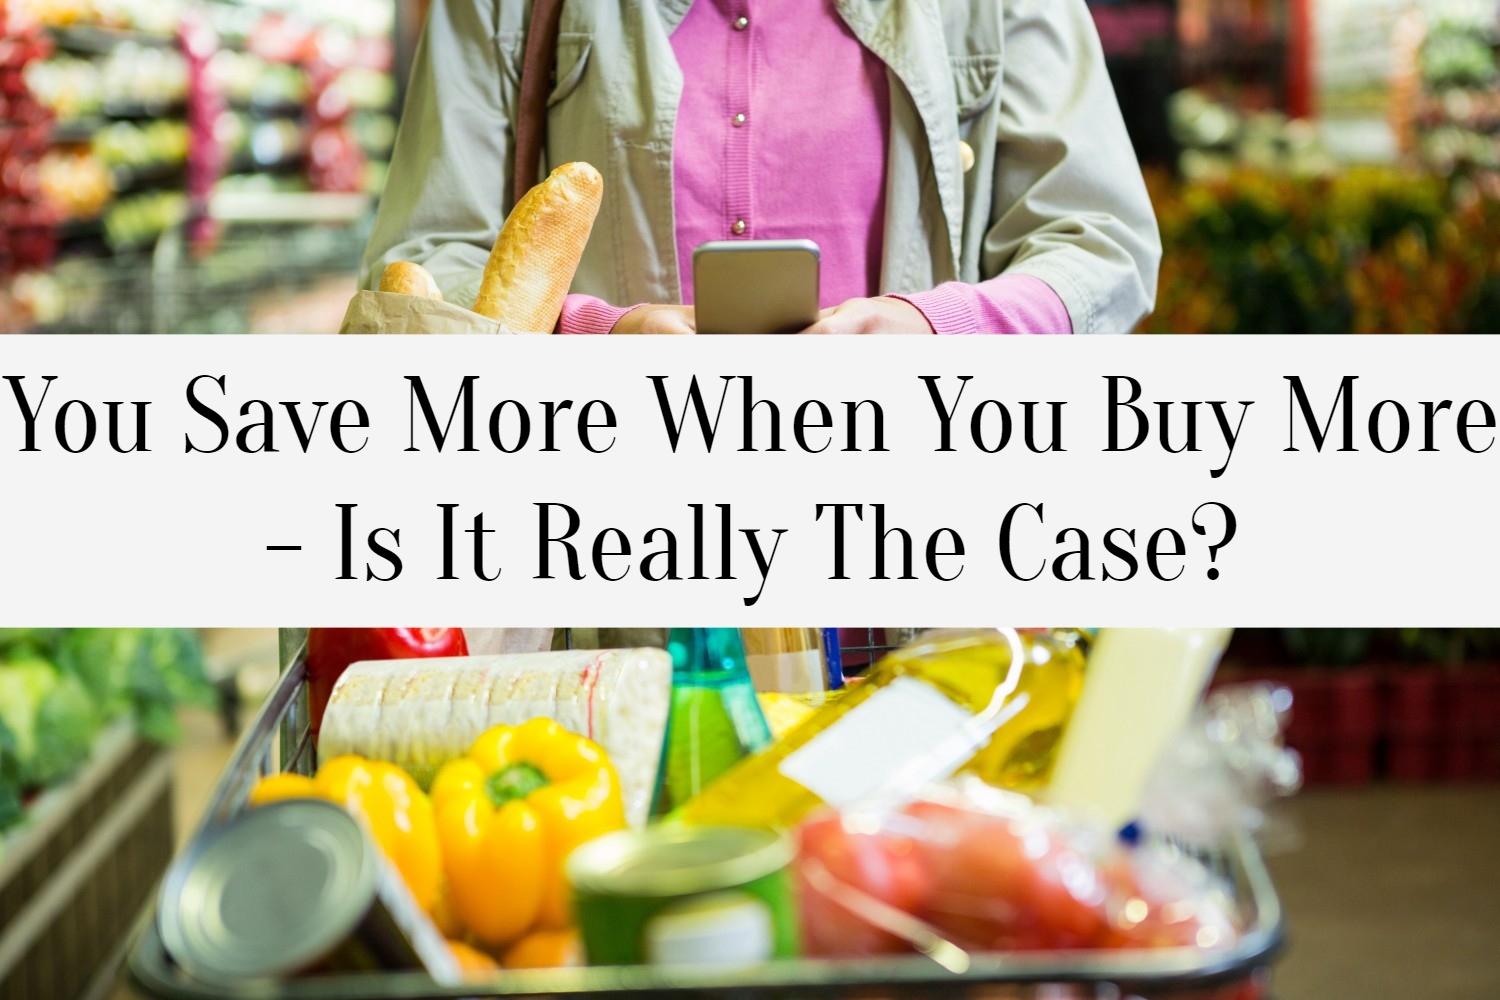 You Save More When You Buy More - Is It Really The Case?